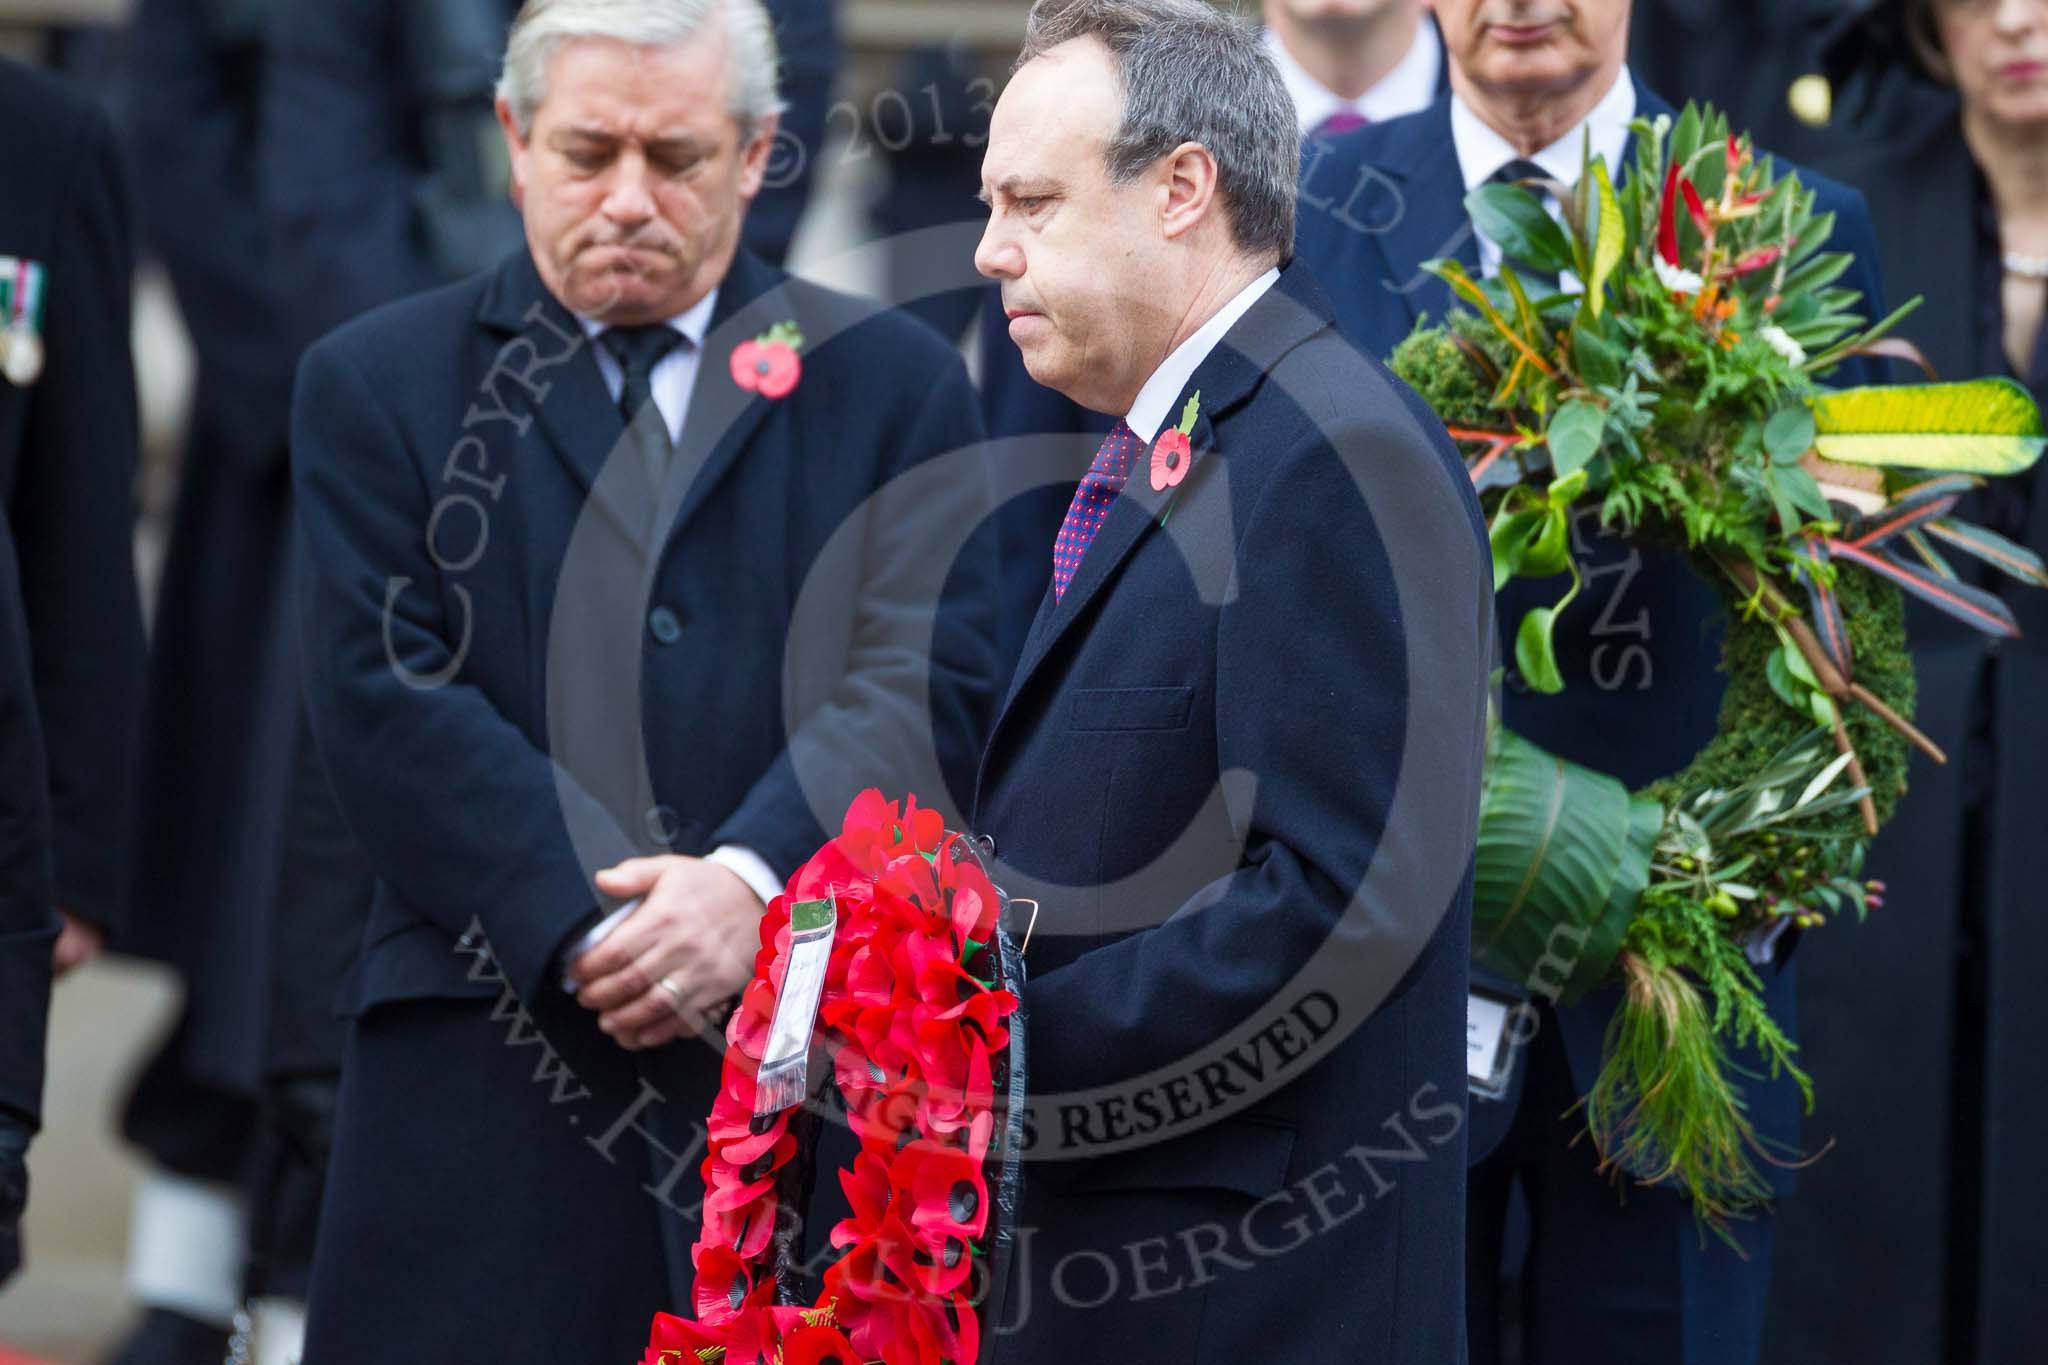 Remembrance Sunday at the Cenotaph 2015: The Westminster Democratic Unionist Party Leader, Nigel Dodds, walking towards the Cenotaph with his wreath. Image #219, 08 November 2015 11:07 Whitehall, London, UK